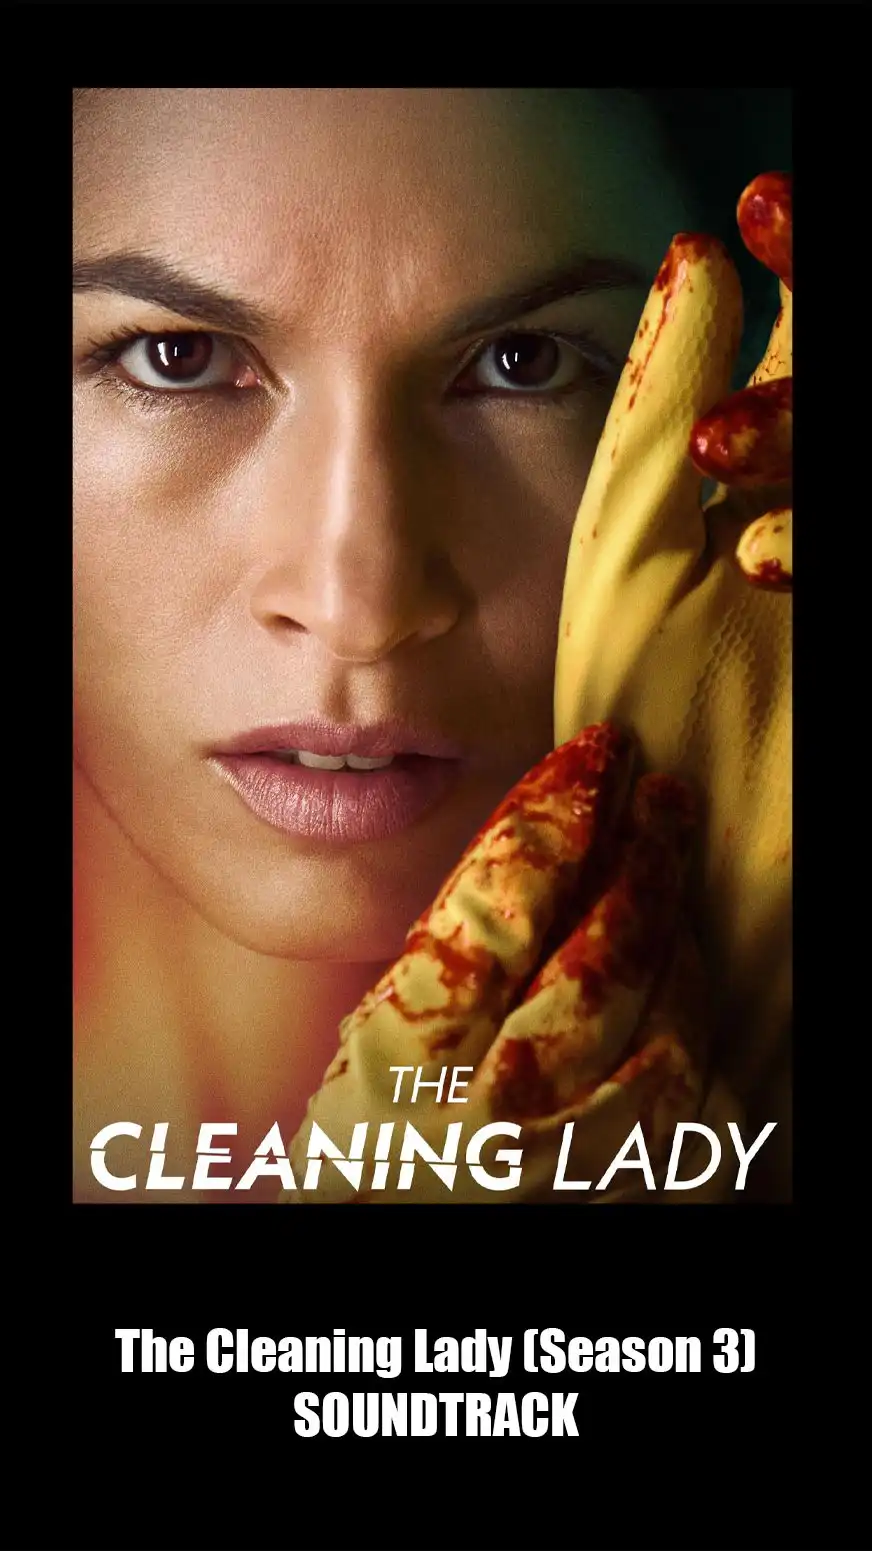 The Cleaning Lady Soundtrack Season 3